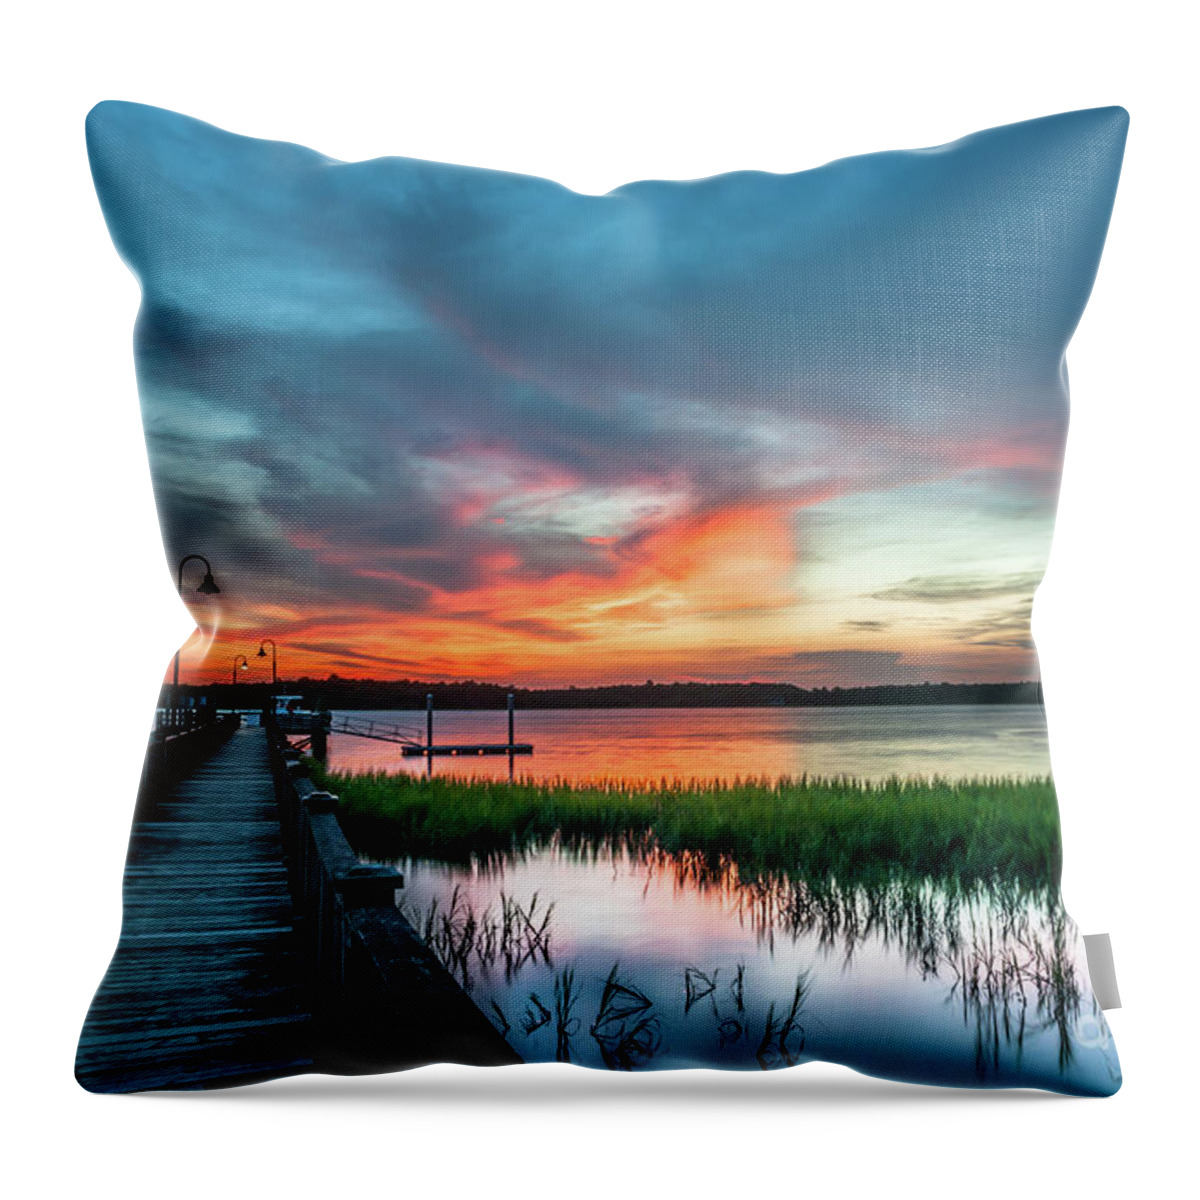 Wando River Throw Pillow featuring the photograph Wando River Sunset Burst by Dale Powell